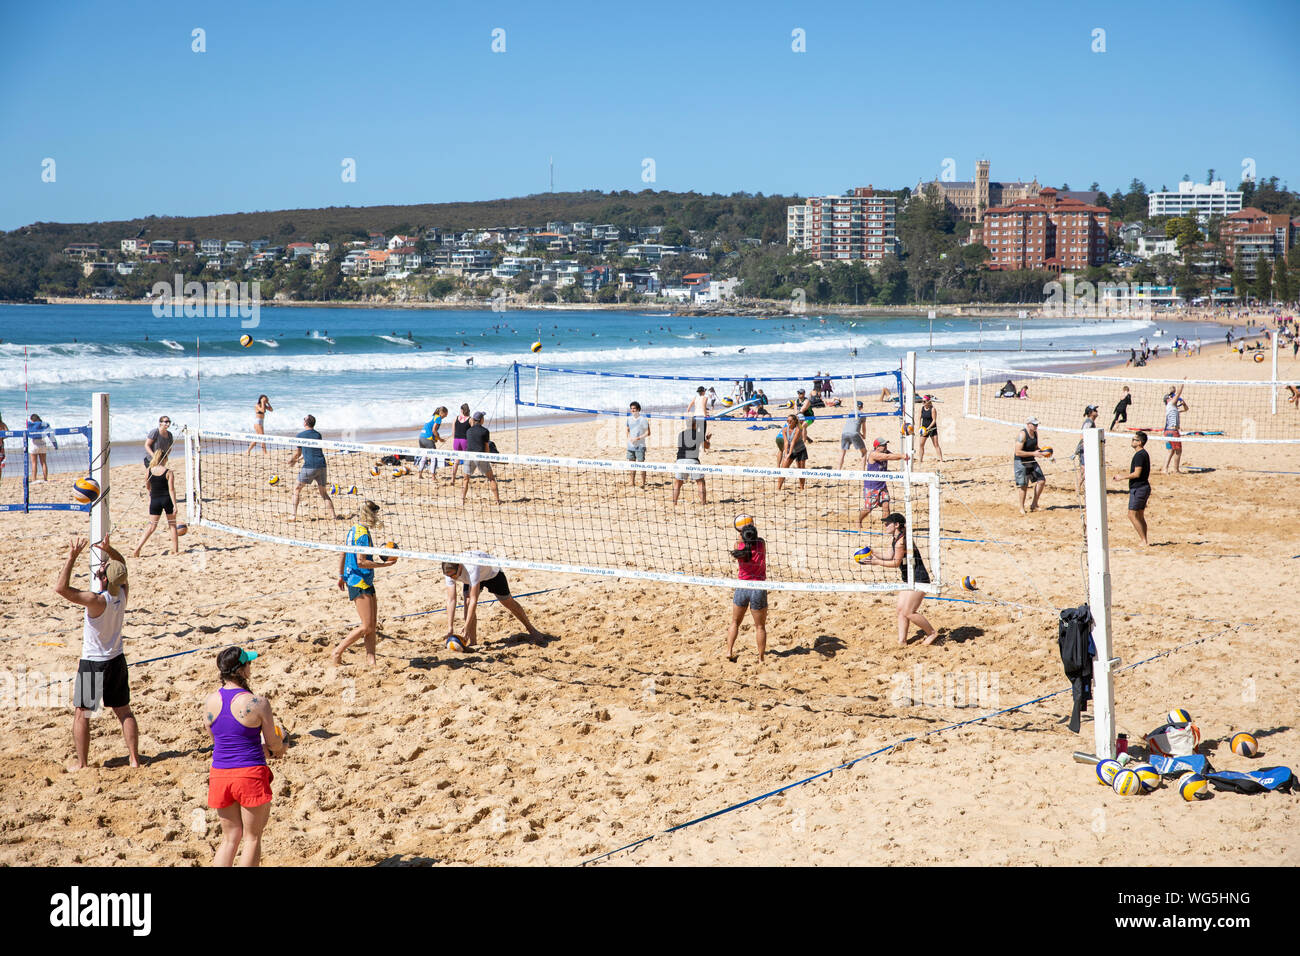 People playing beach volleyball on Manly beach in Sydney northern beaches,NSW, Australia Stock Photo